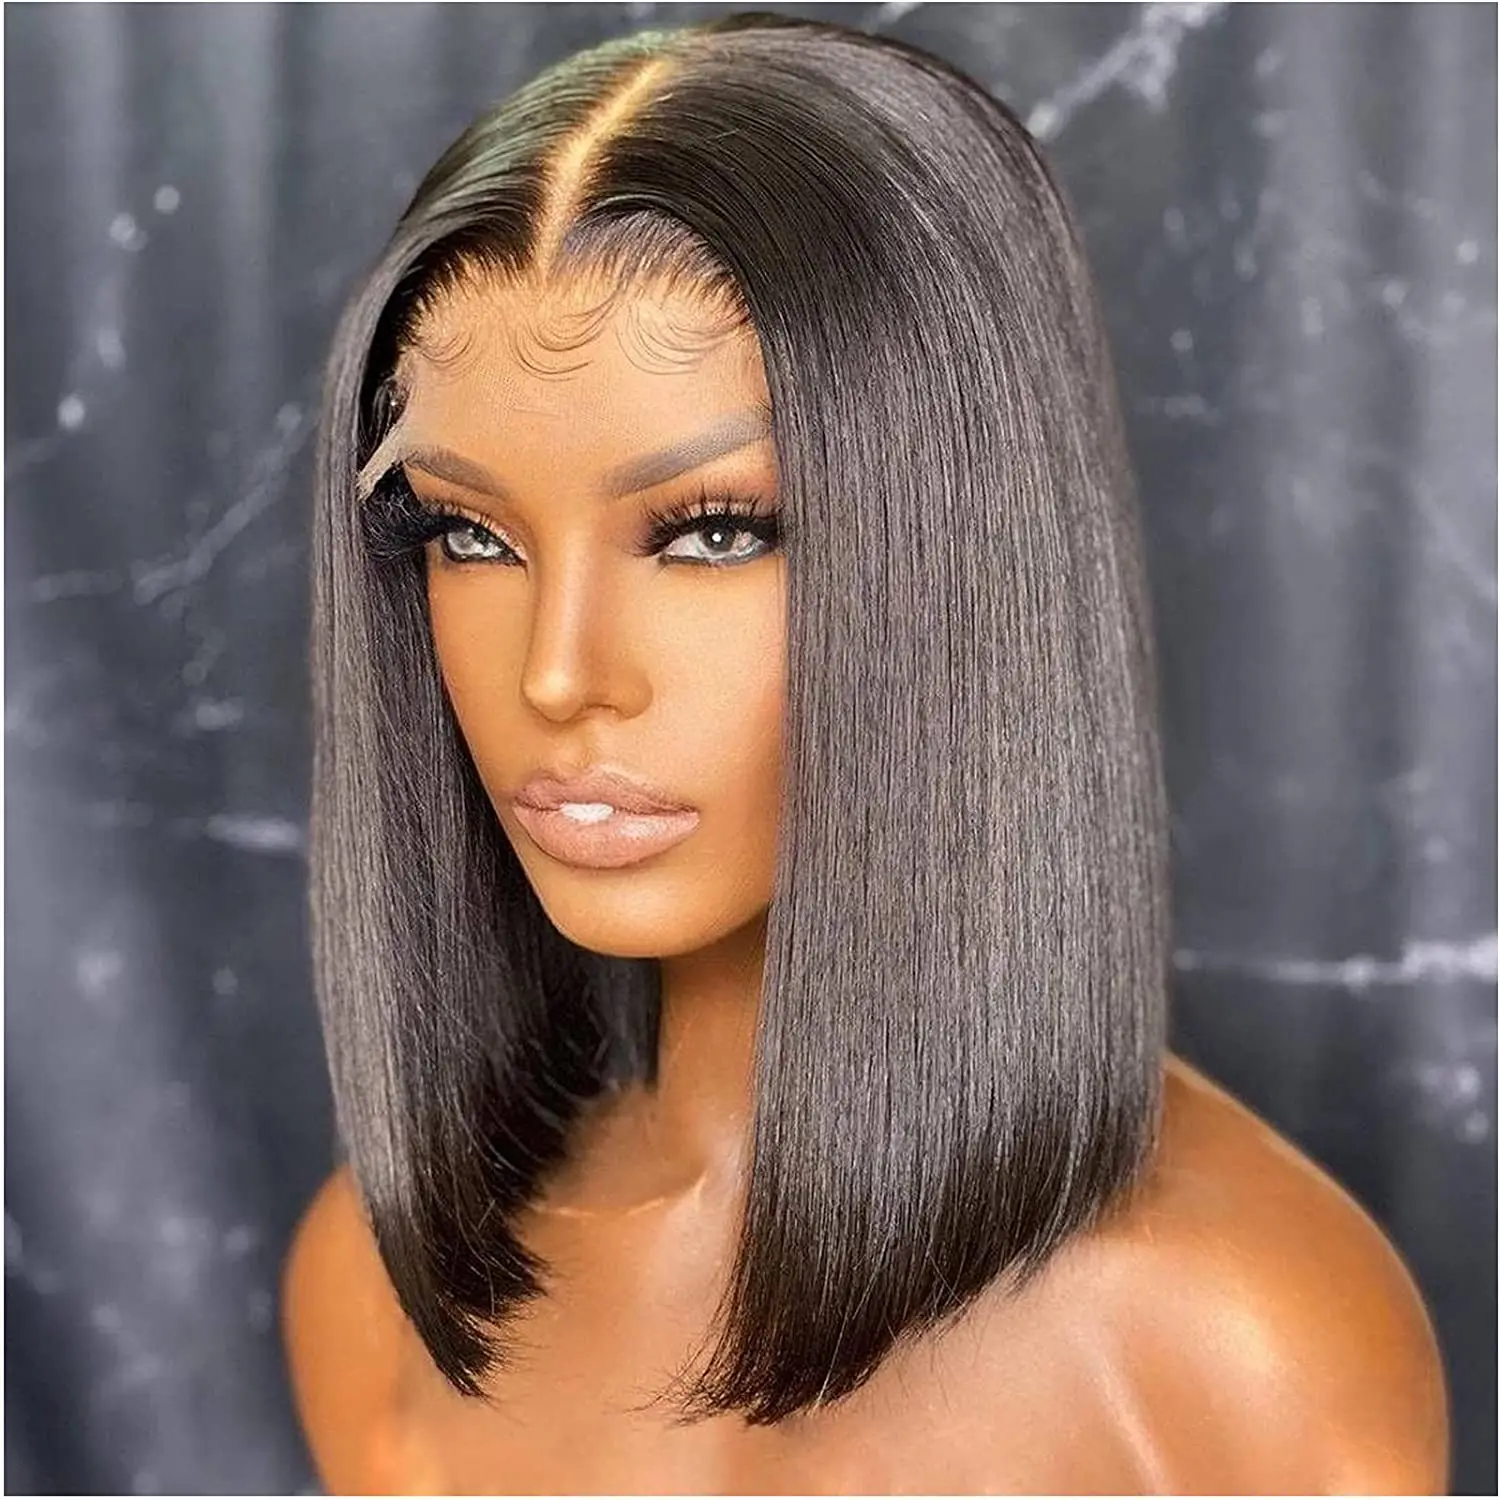 

4x4 5x5 Peruvian Straight Bob Wigs Human Hair Lace Front Closure Short Ombre Color Deep Wave Curly Bob Lace Front Wig